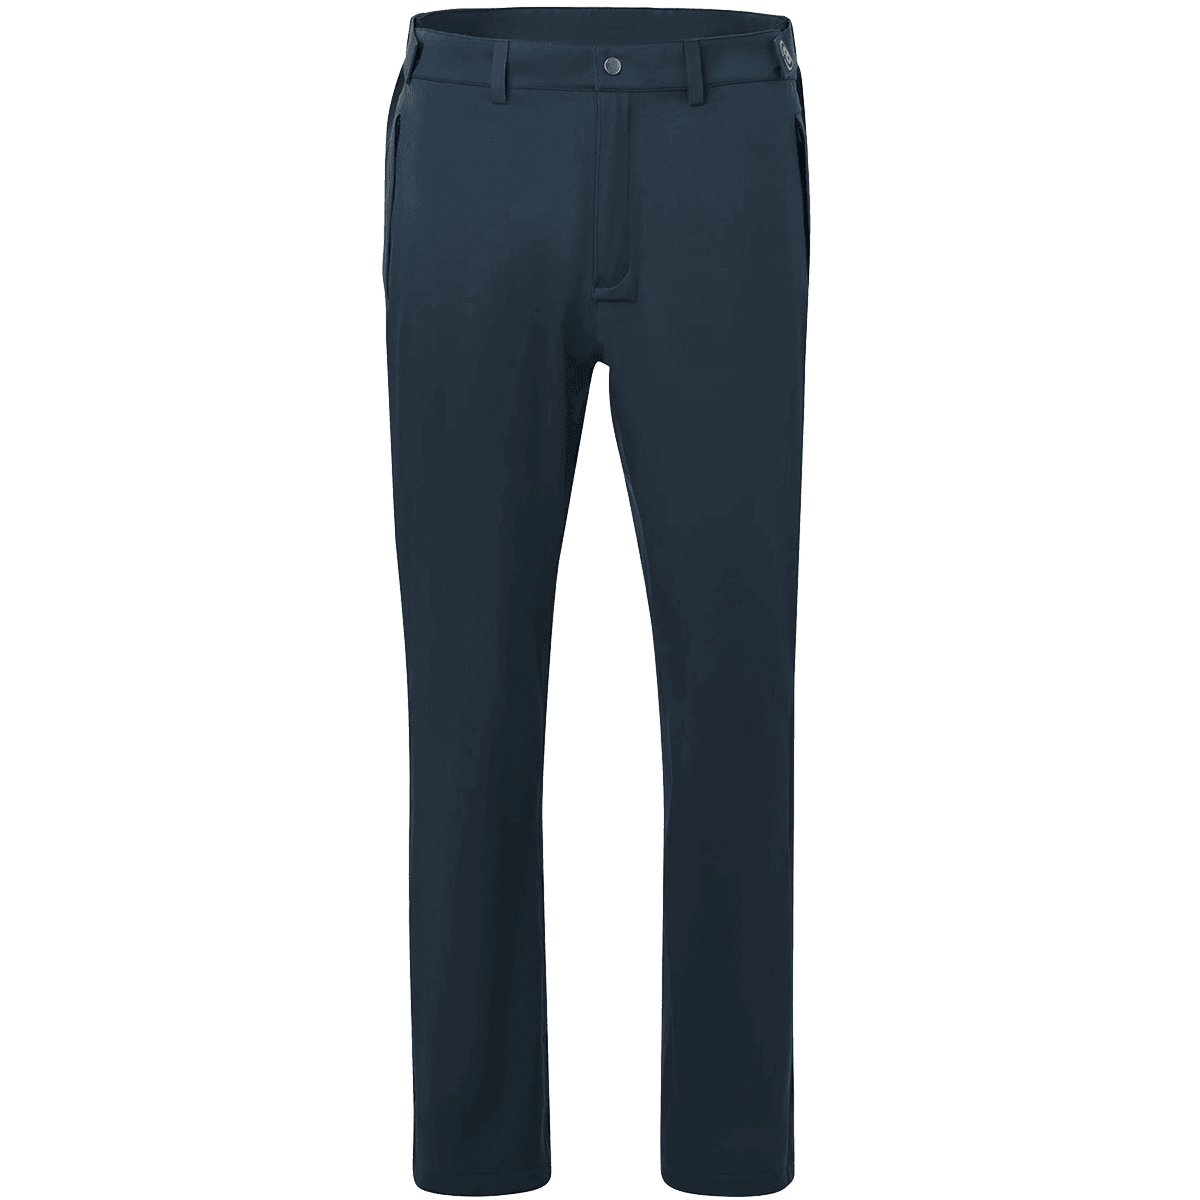 Abacus Bounce rain trouser review